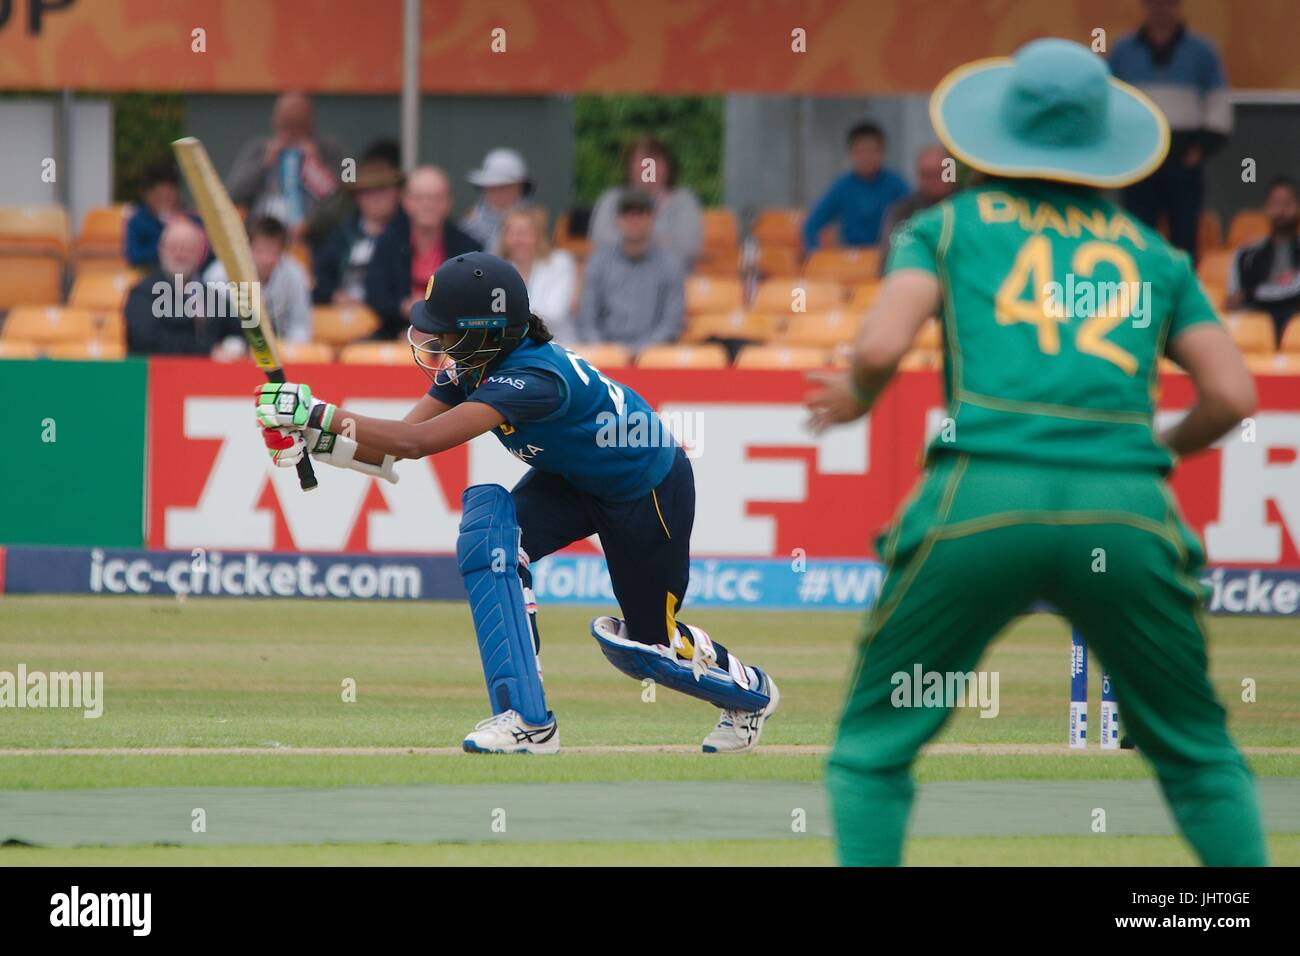 Leicester, England, 15th July 2017. Nipuni Hansika batting for Sri Lanka against Pakistan in the ICC Women’s World Cup 2017 at Grace Road, Leicester.  Credit: Colin Edwards/Alamy Live News. Stock Photo